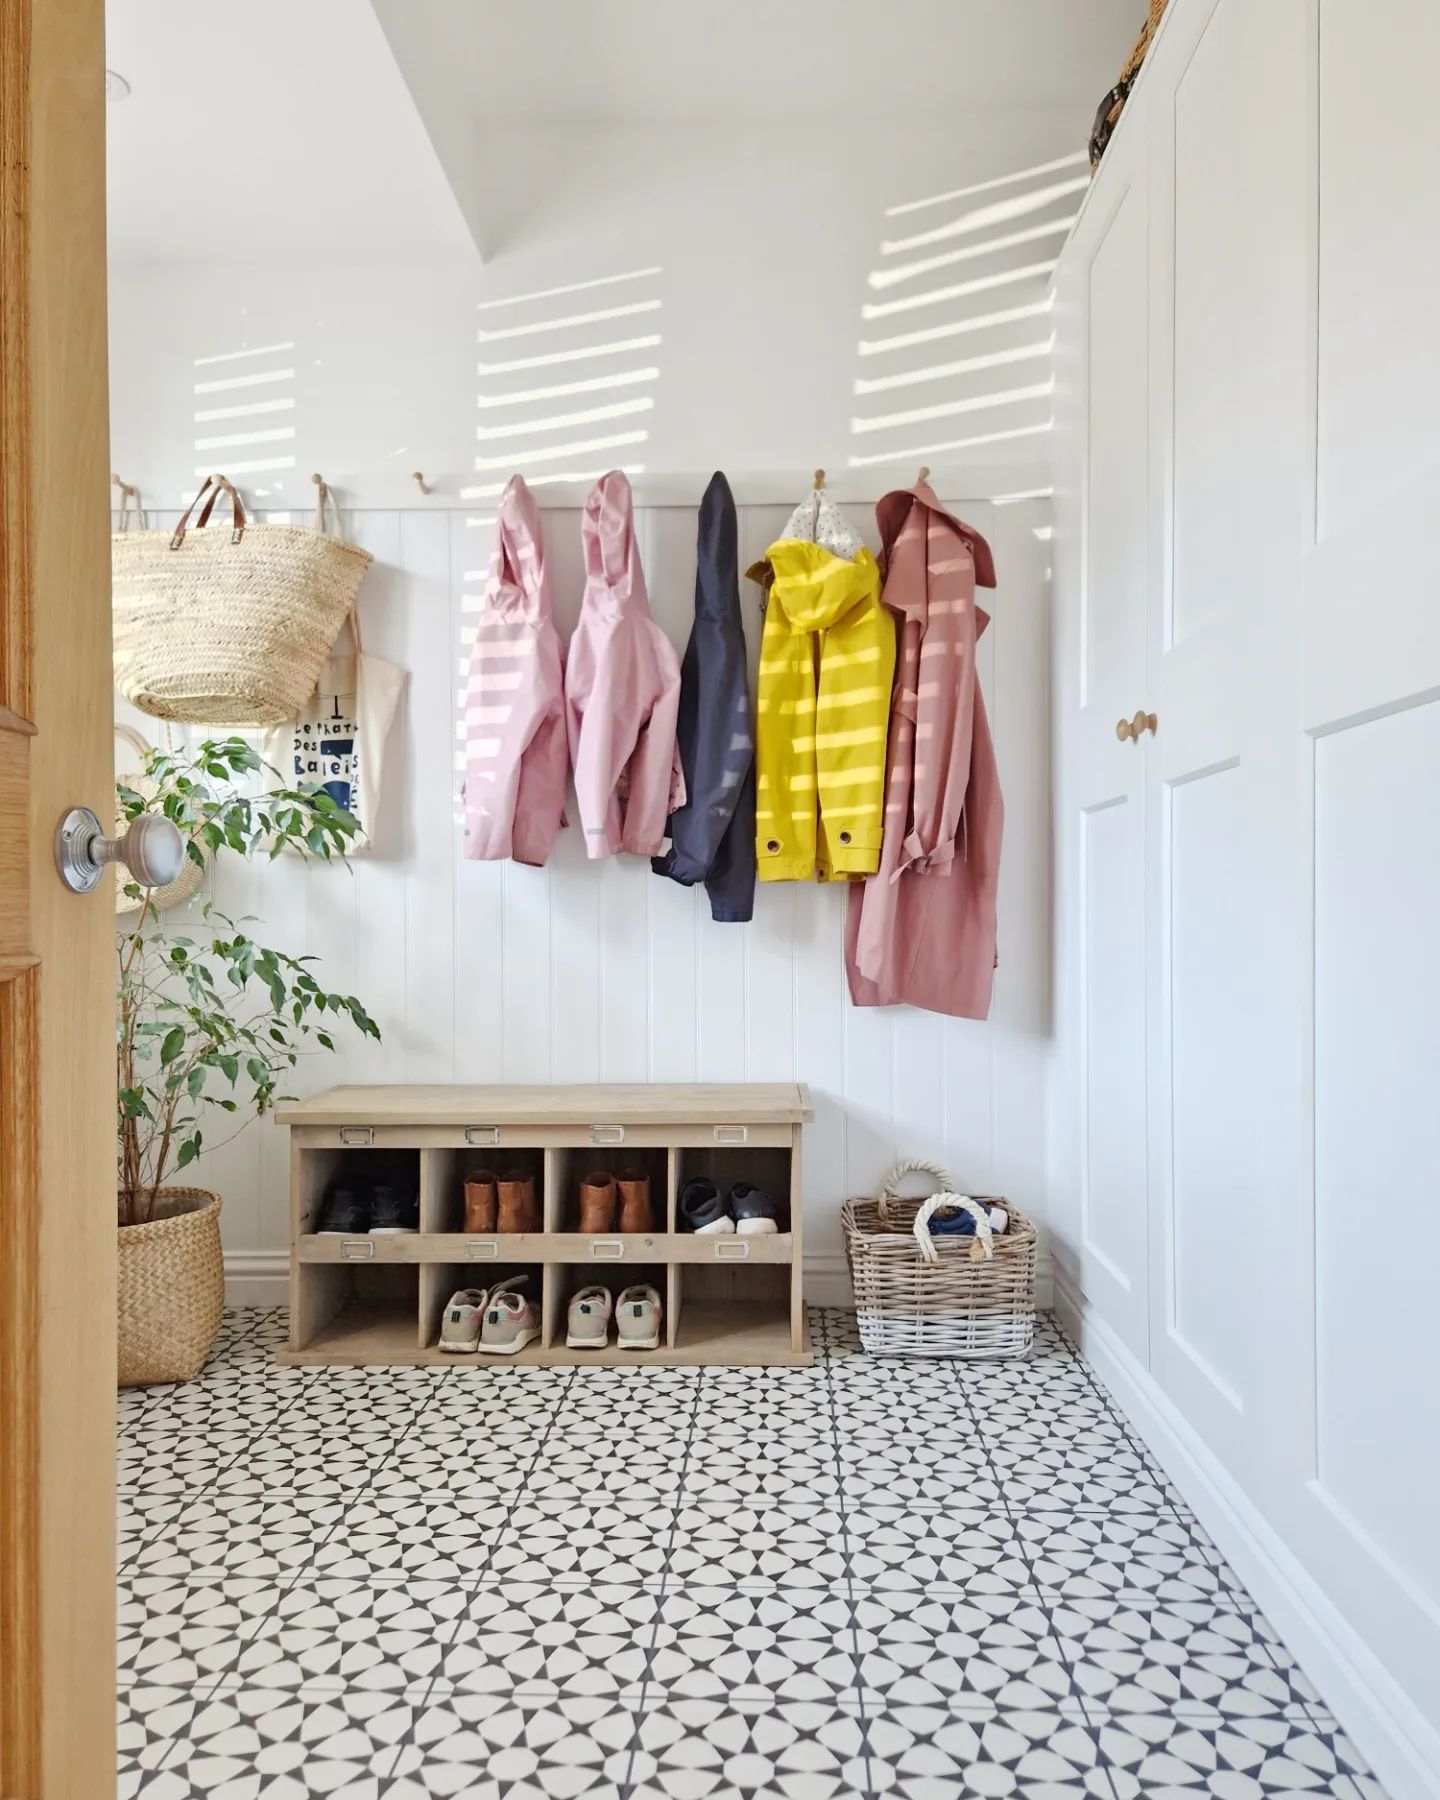 Front view of a mudroom with storage and hung-up jackets.